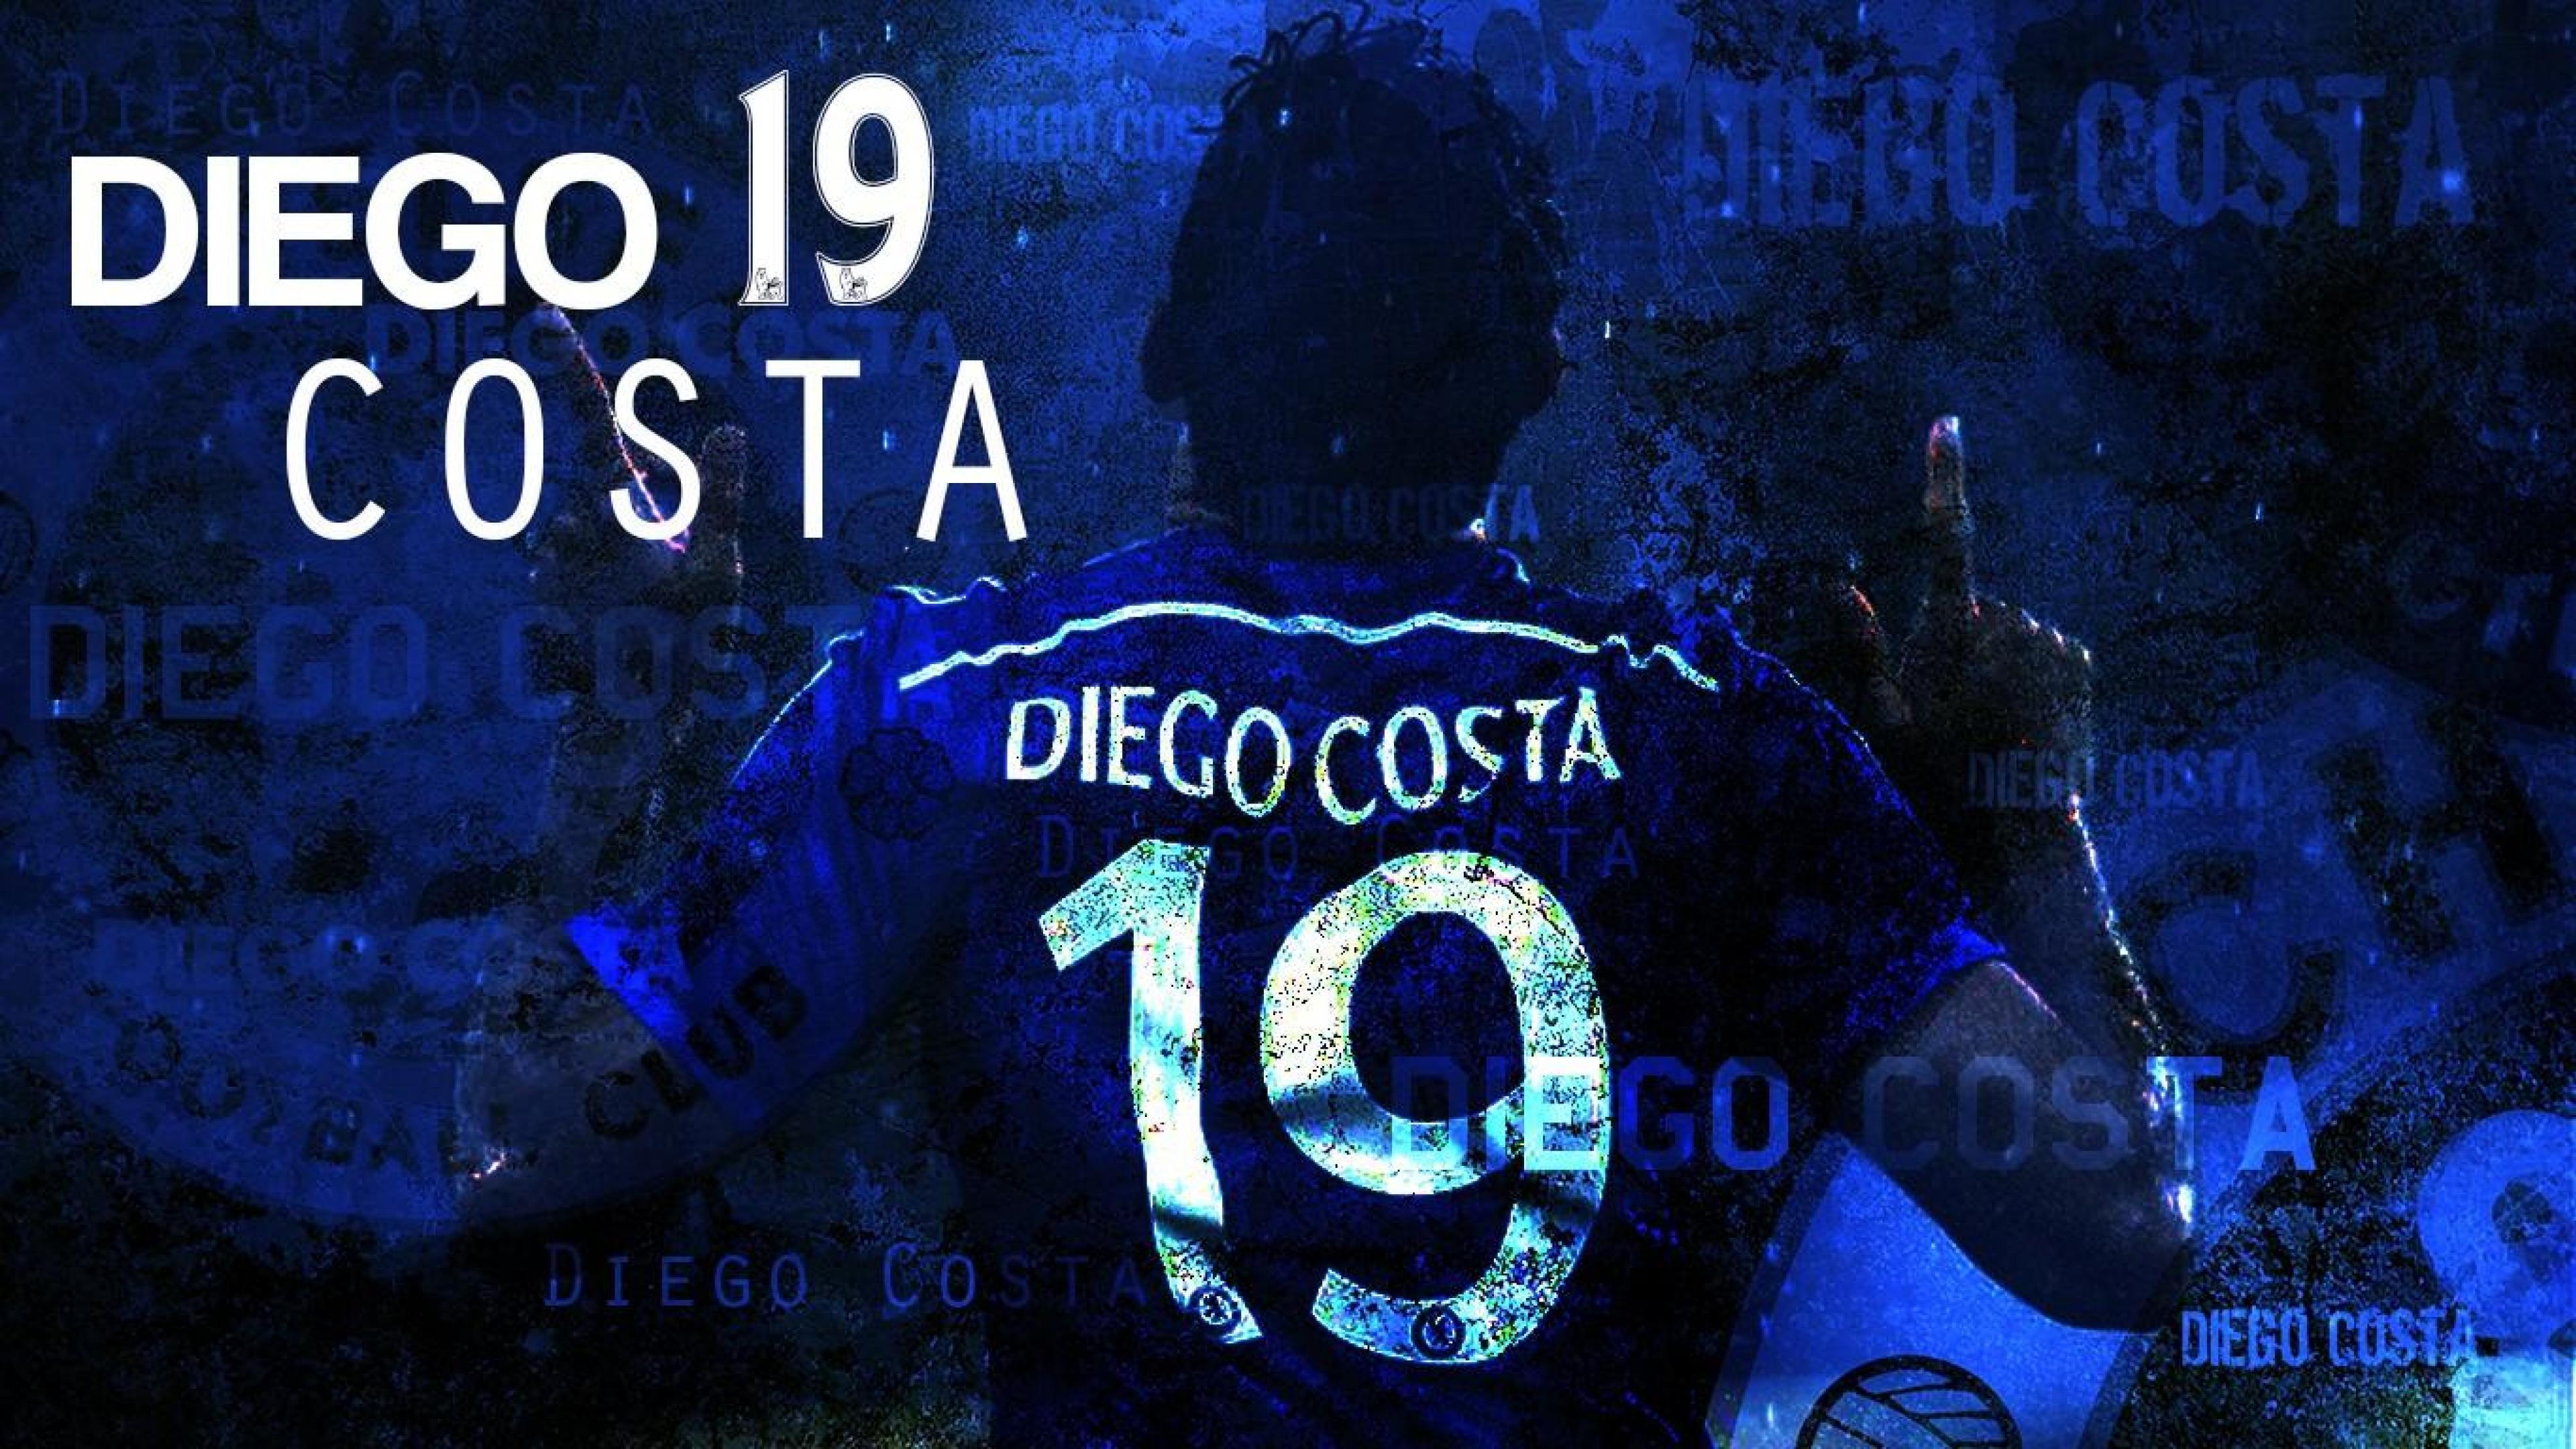 Diego Costa Wallpapers Wallpaper Cave